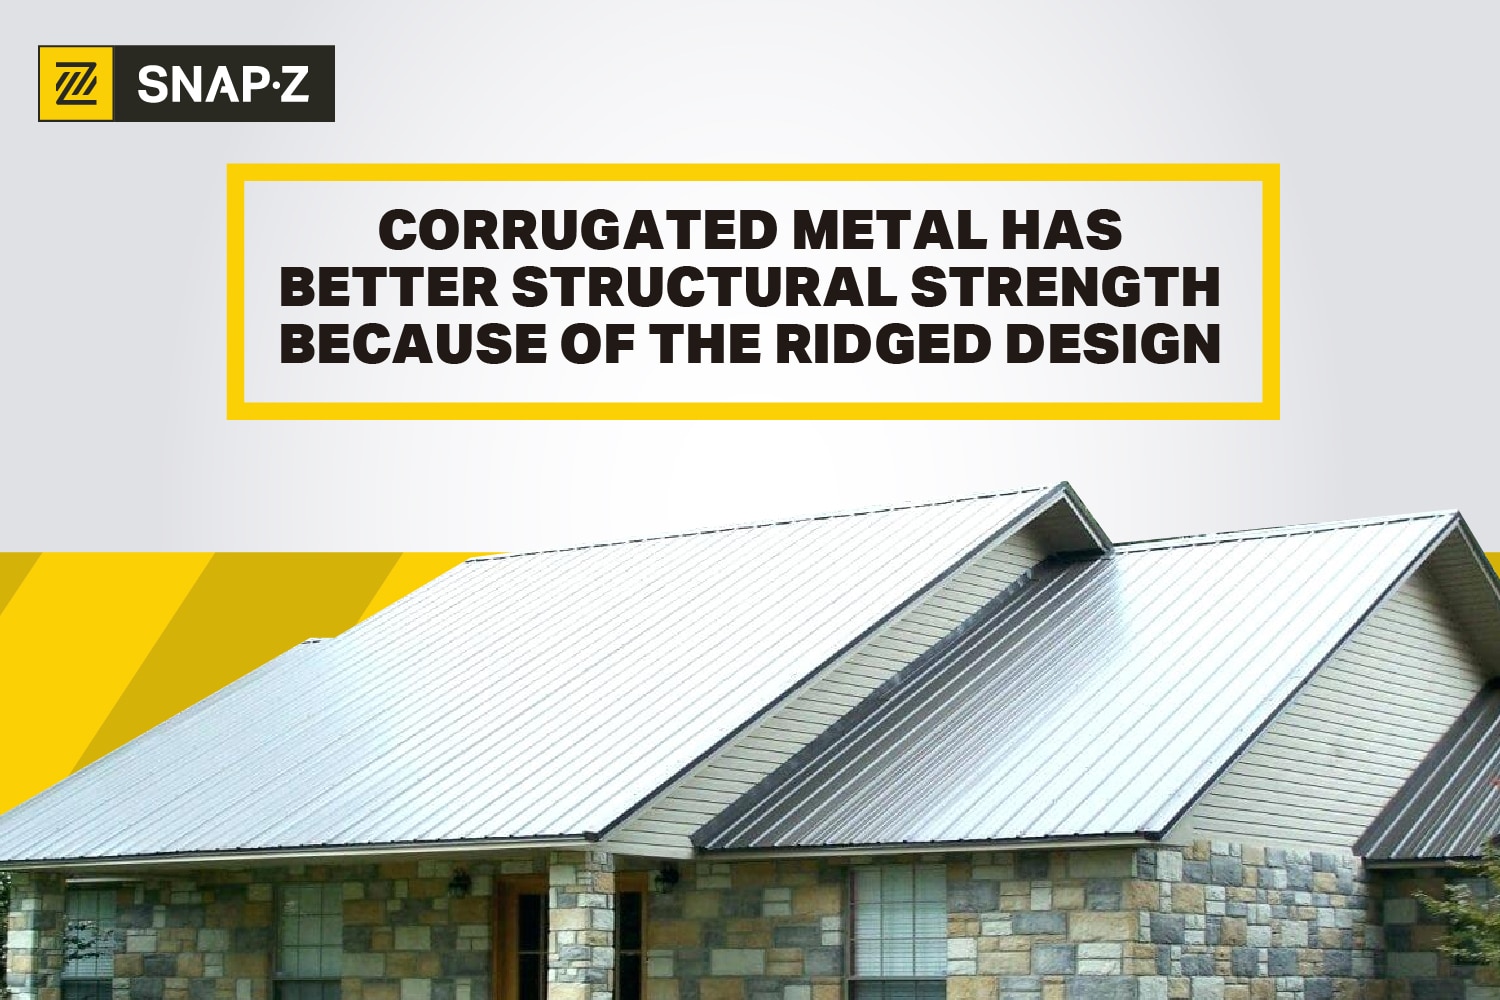 corrugated metal has superior strength because of the ridged design